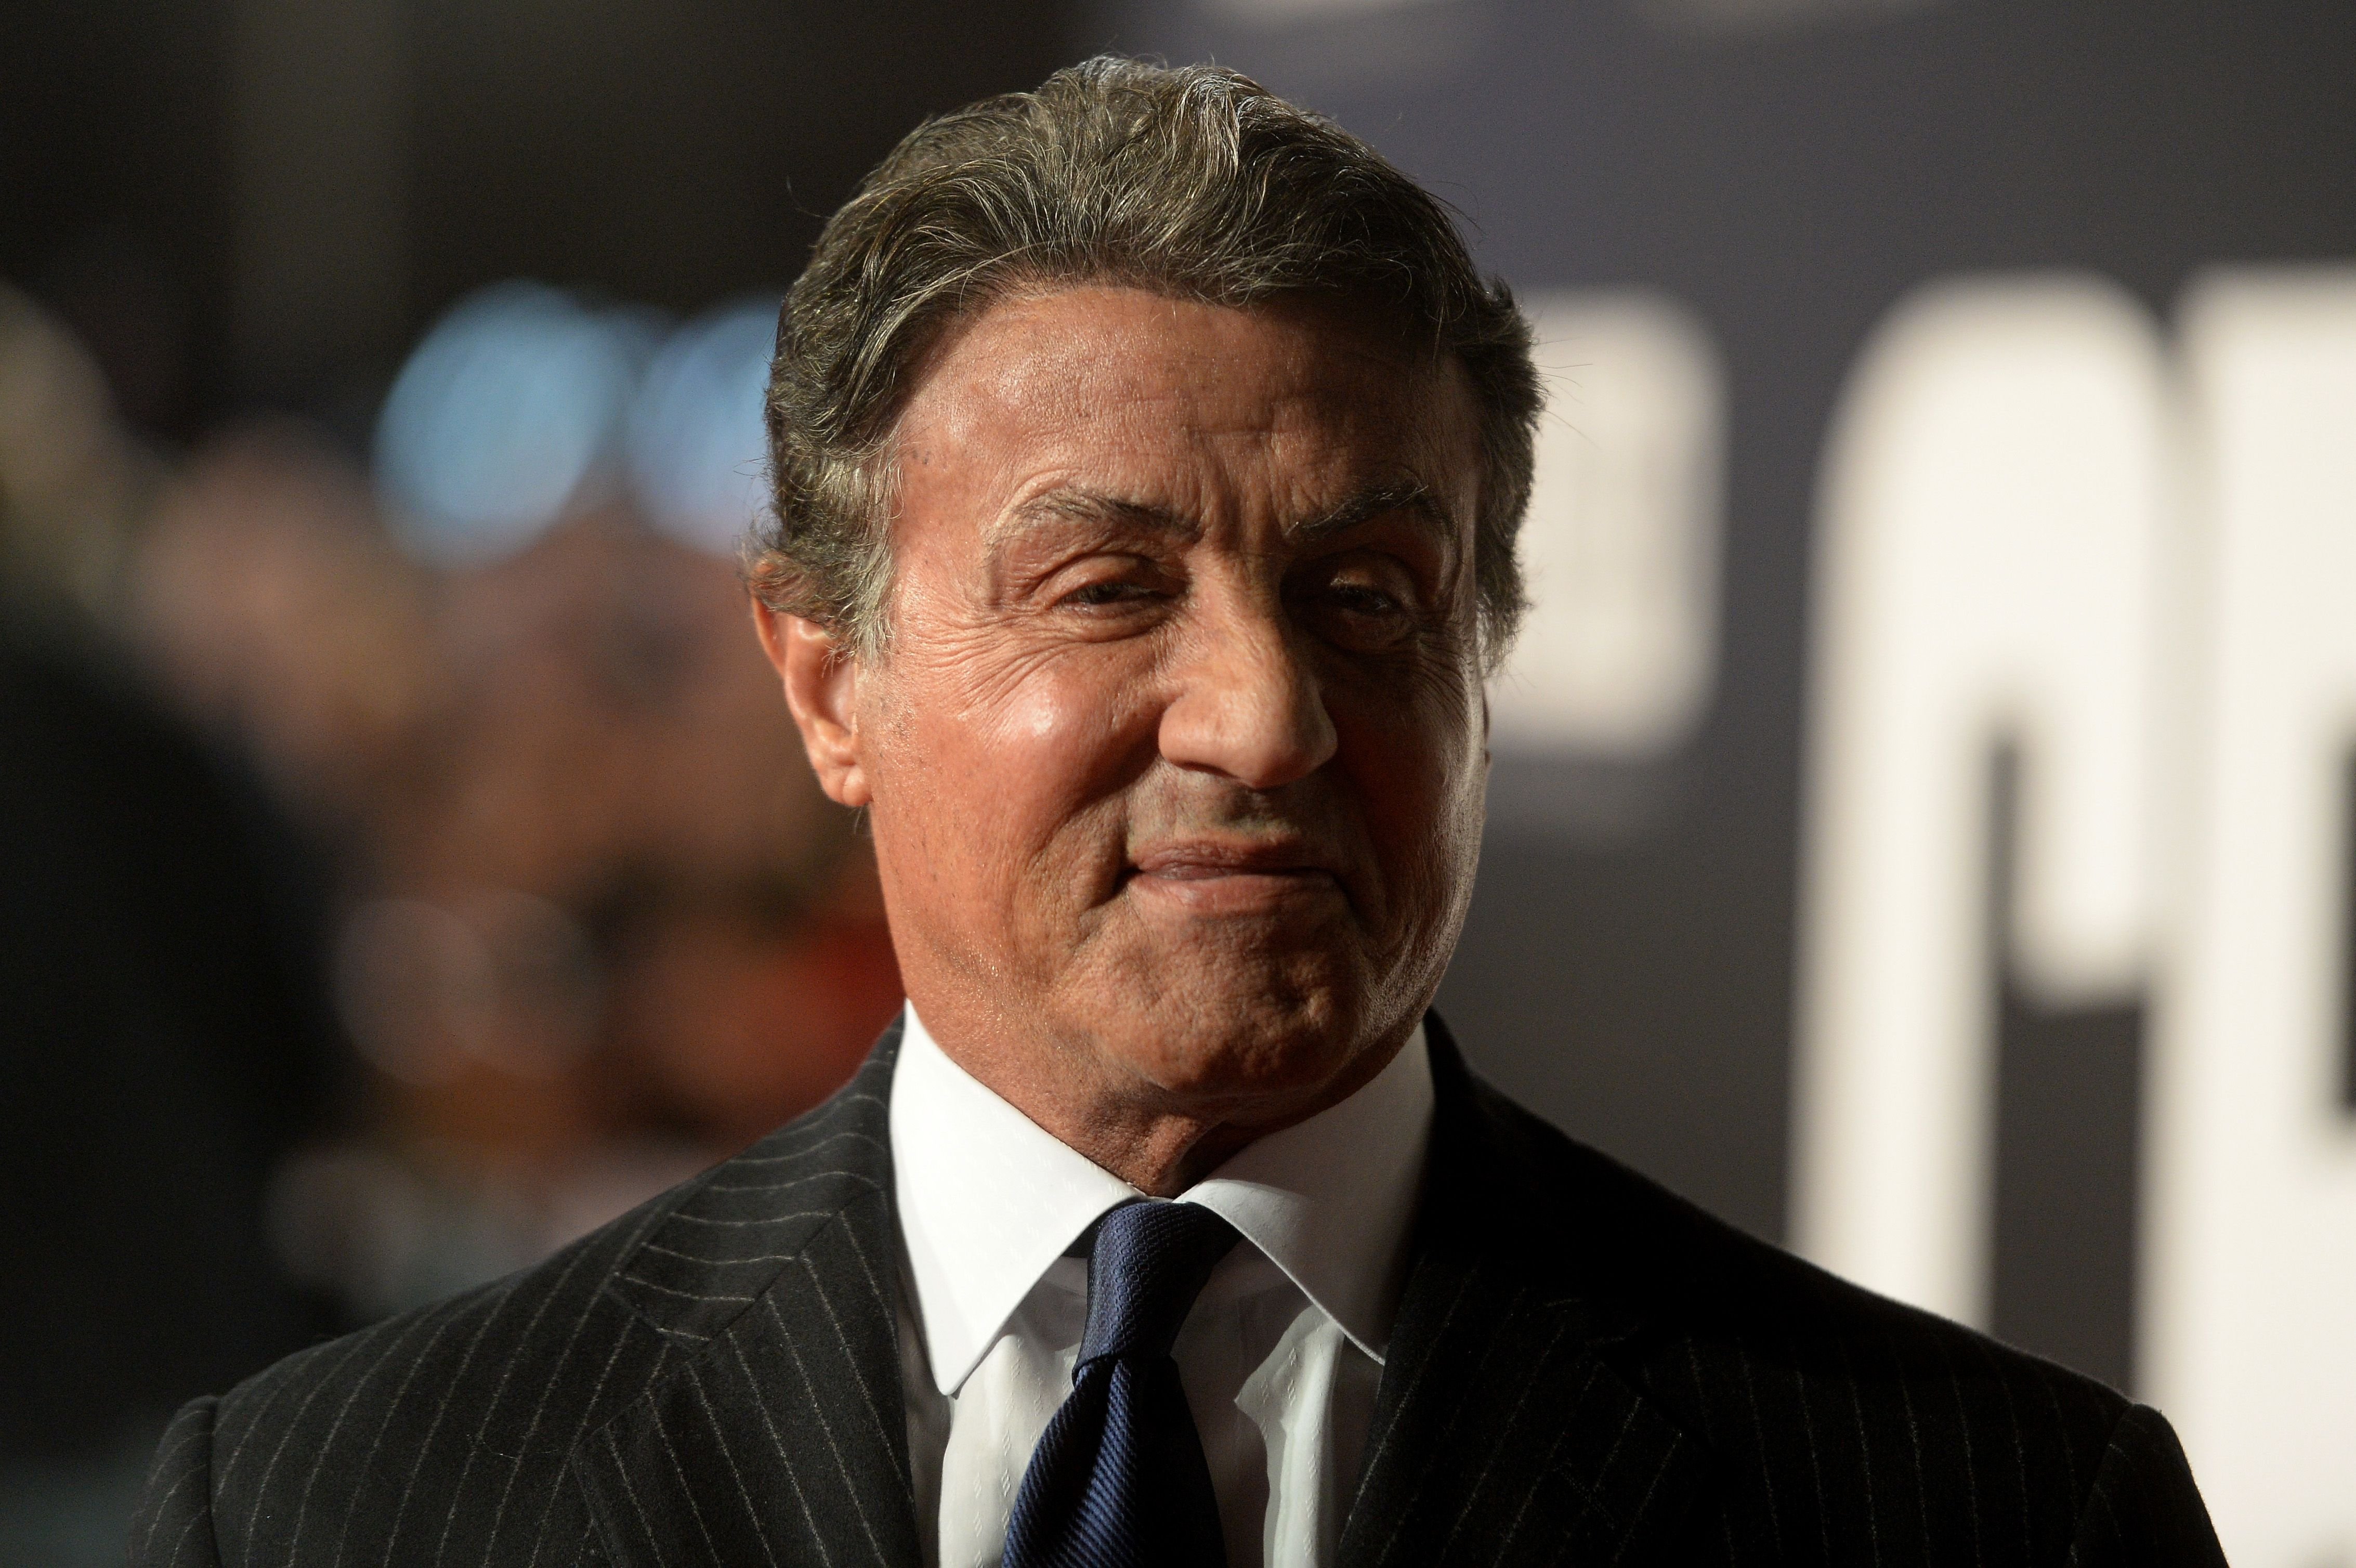 Sylvester Stallone attends the European Premiere of "Creed" at Empire Leicester Square on January 12, 2016 . | Photo: Getty Images.